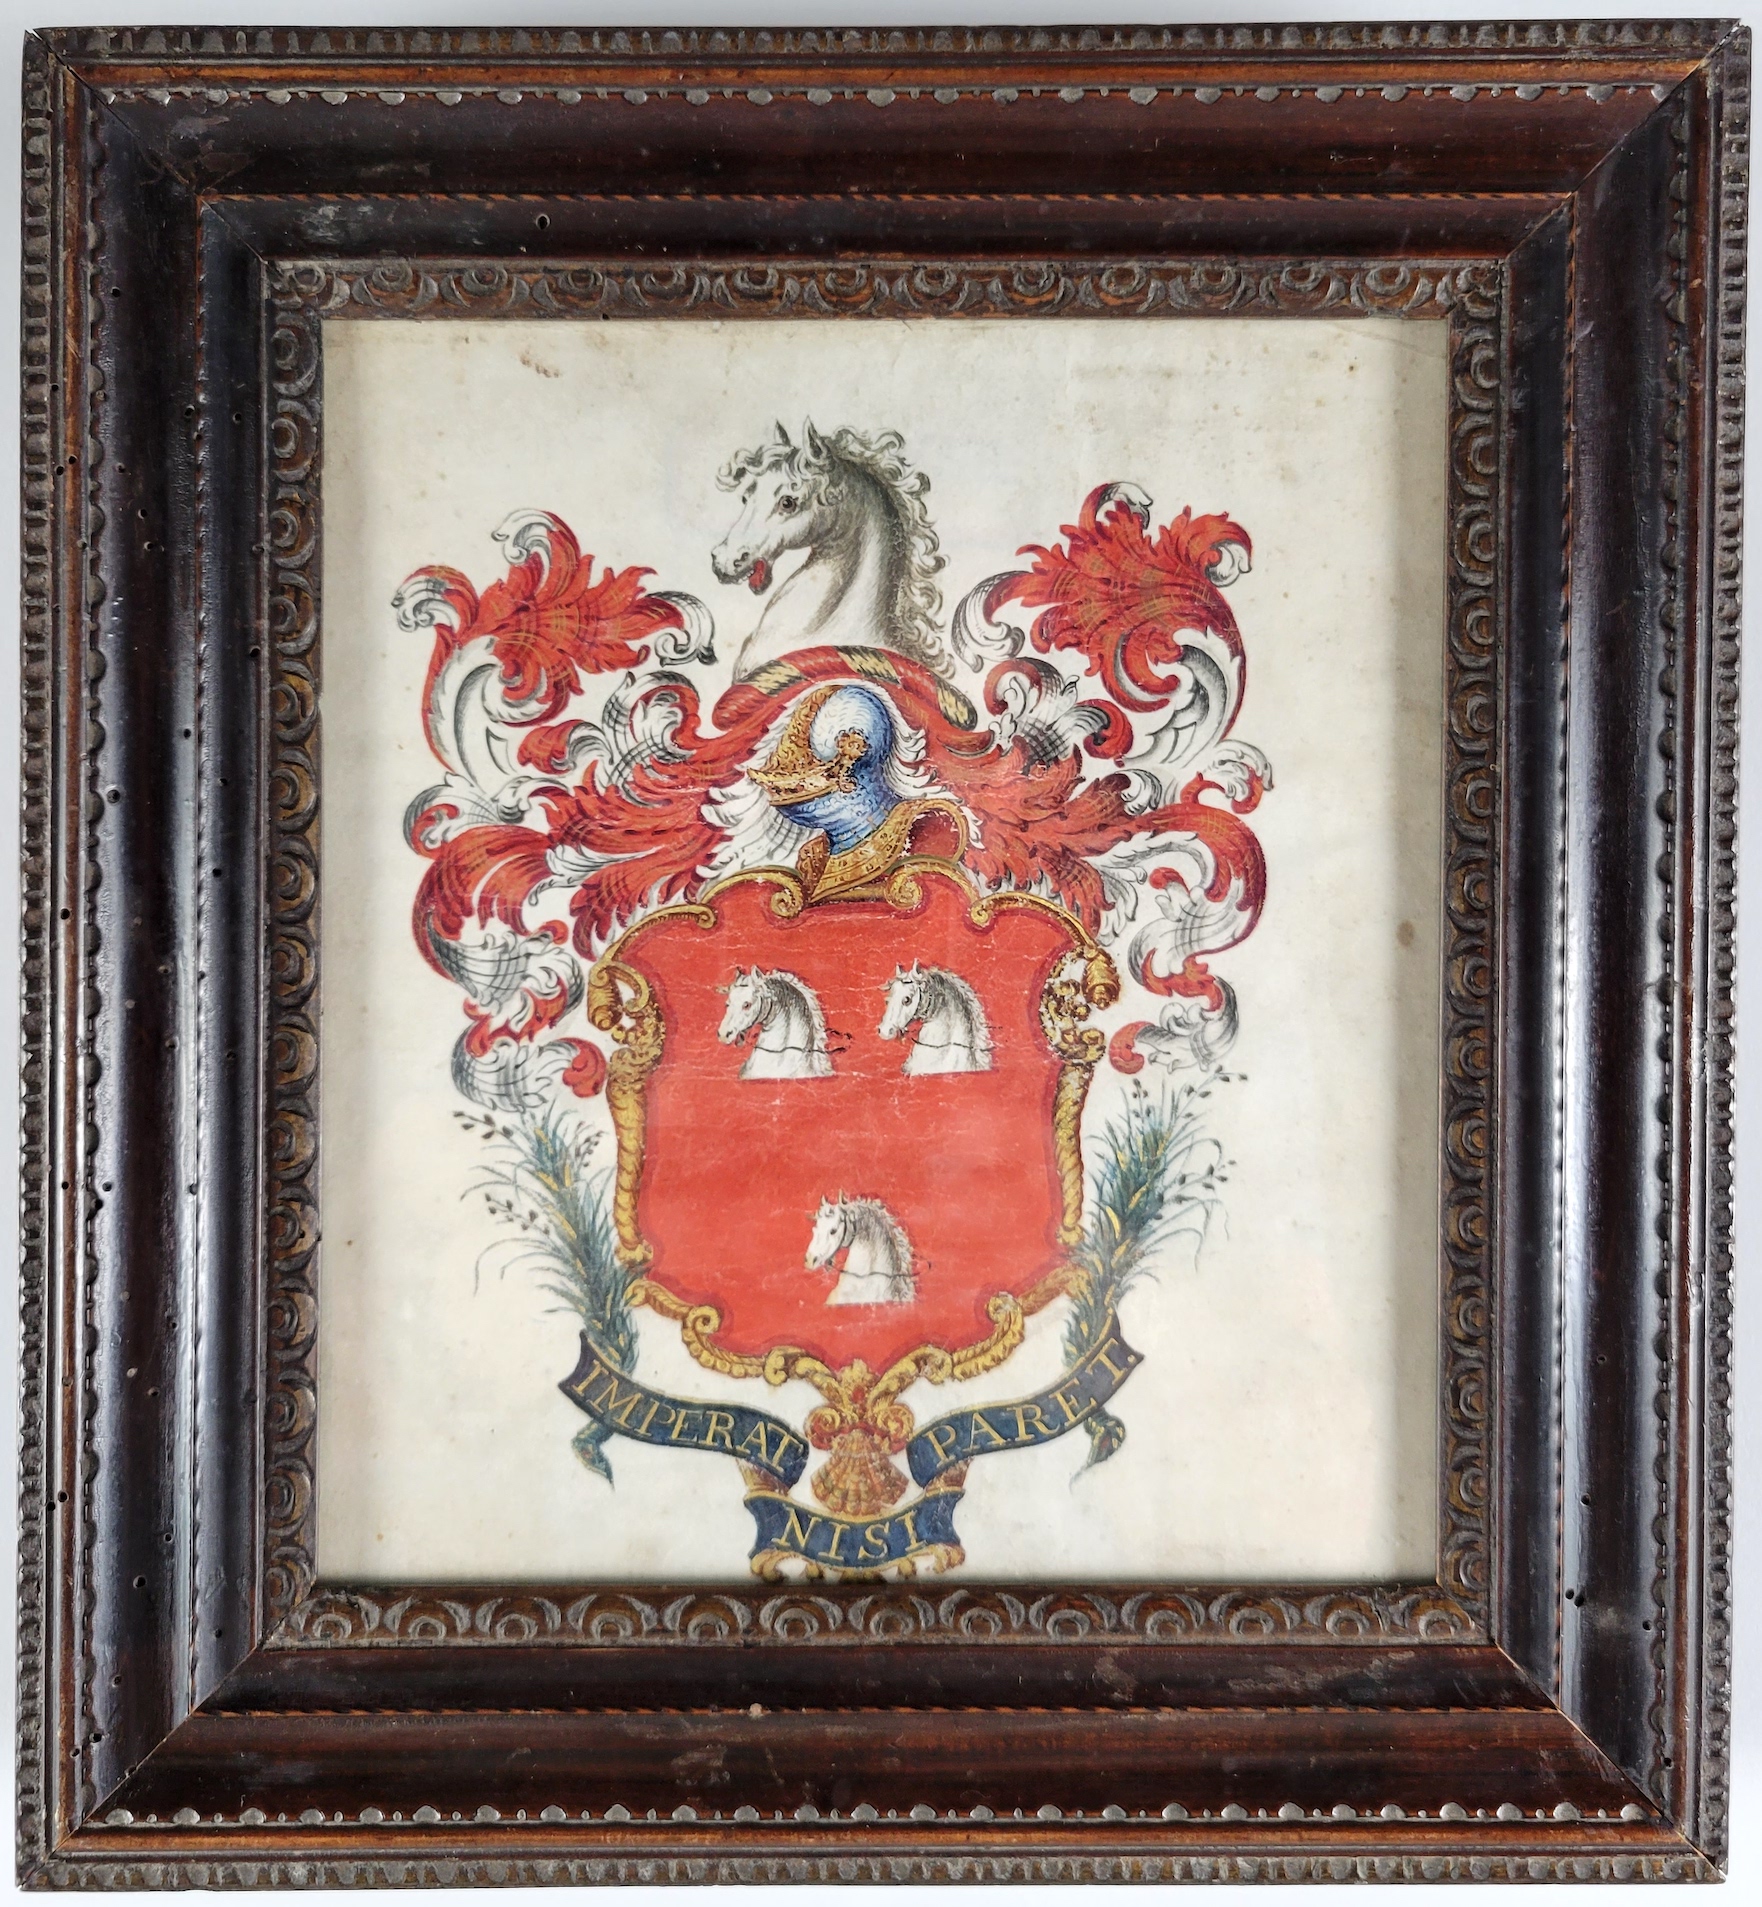 Two Framed 18th Century English Hand Painted Heraldic Coat of Arms Insignia